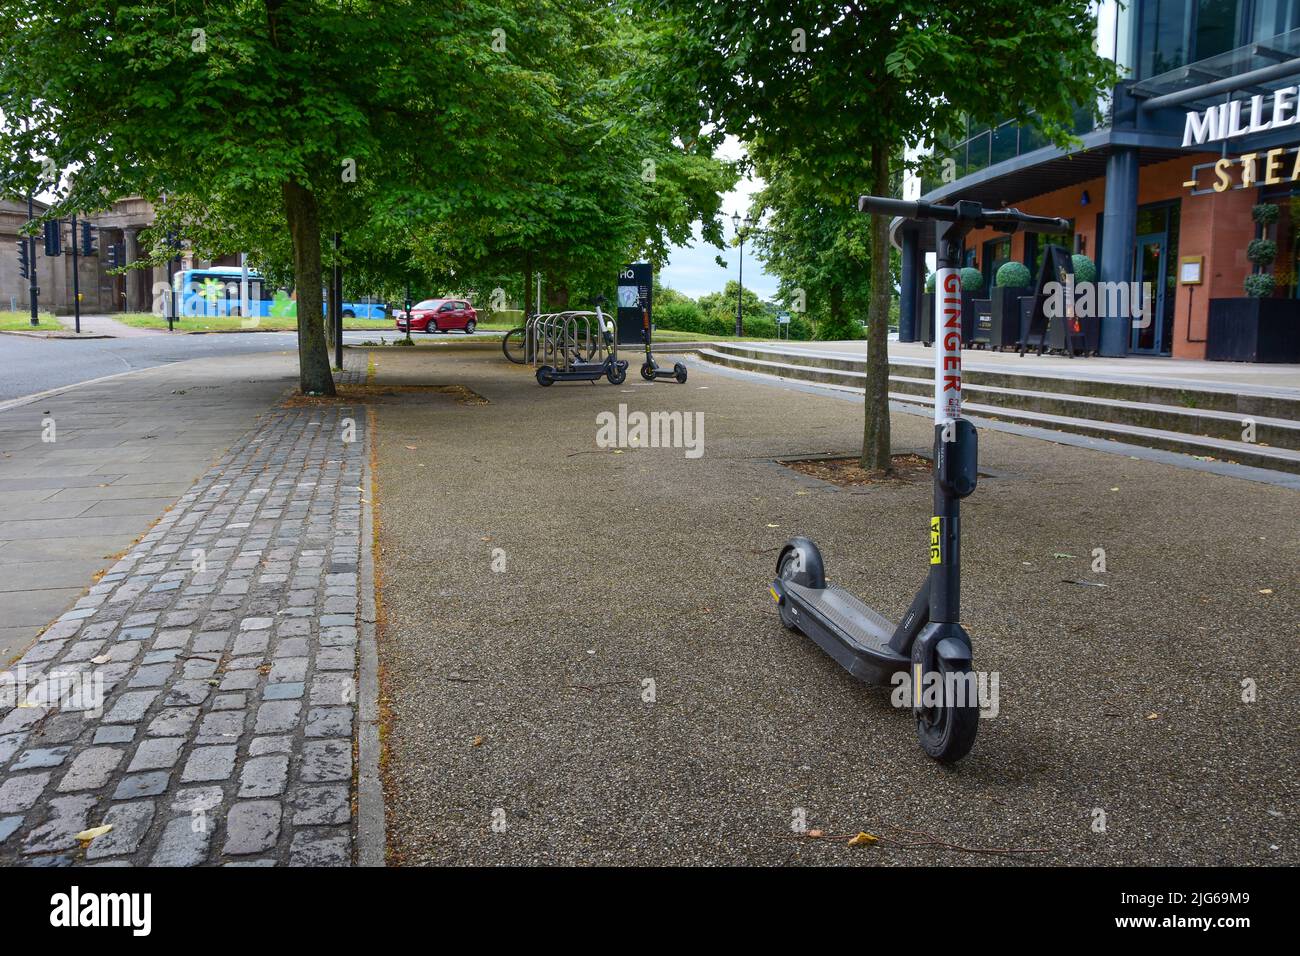 Chester, UK: Jul 3, 2022: A Ginger electric scooter awaits being hired Stock Photo